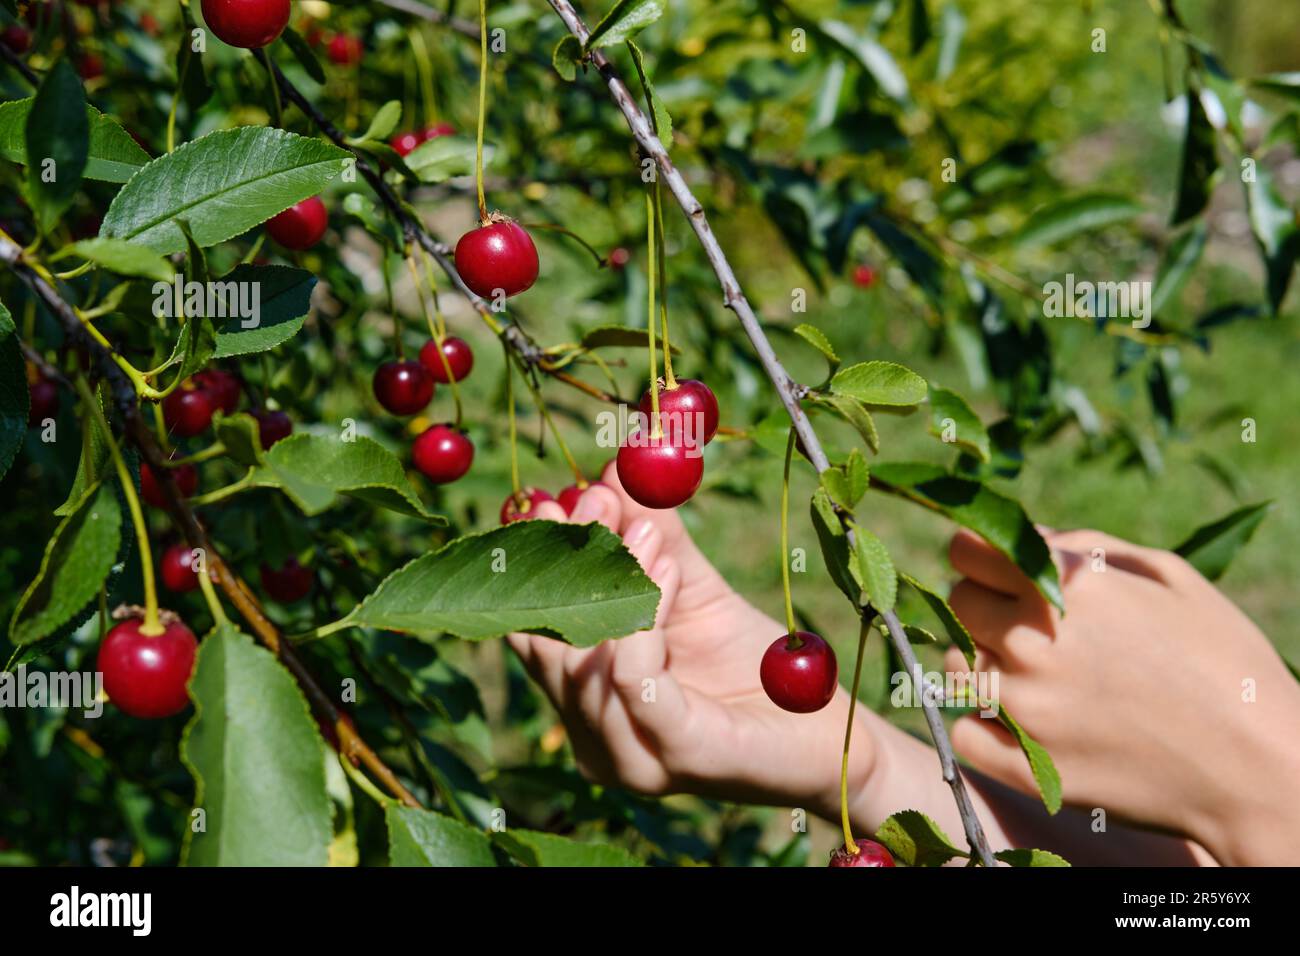 A woman's hand picks ripe red cherry berries from a branch. Cherry harvesting. The concept of organic healthy food Stock Photo